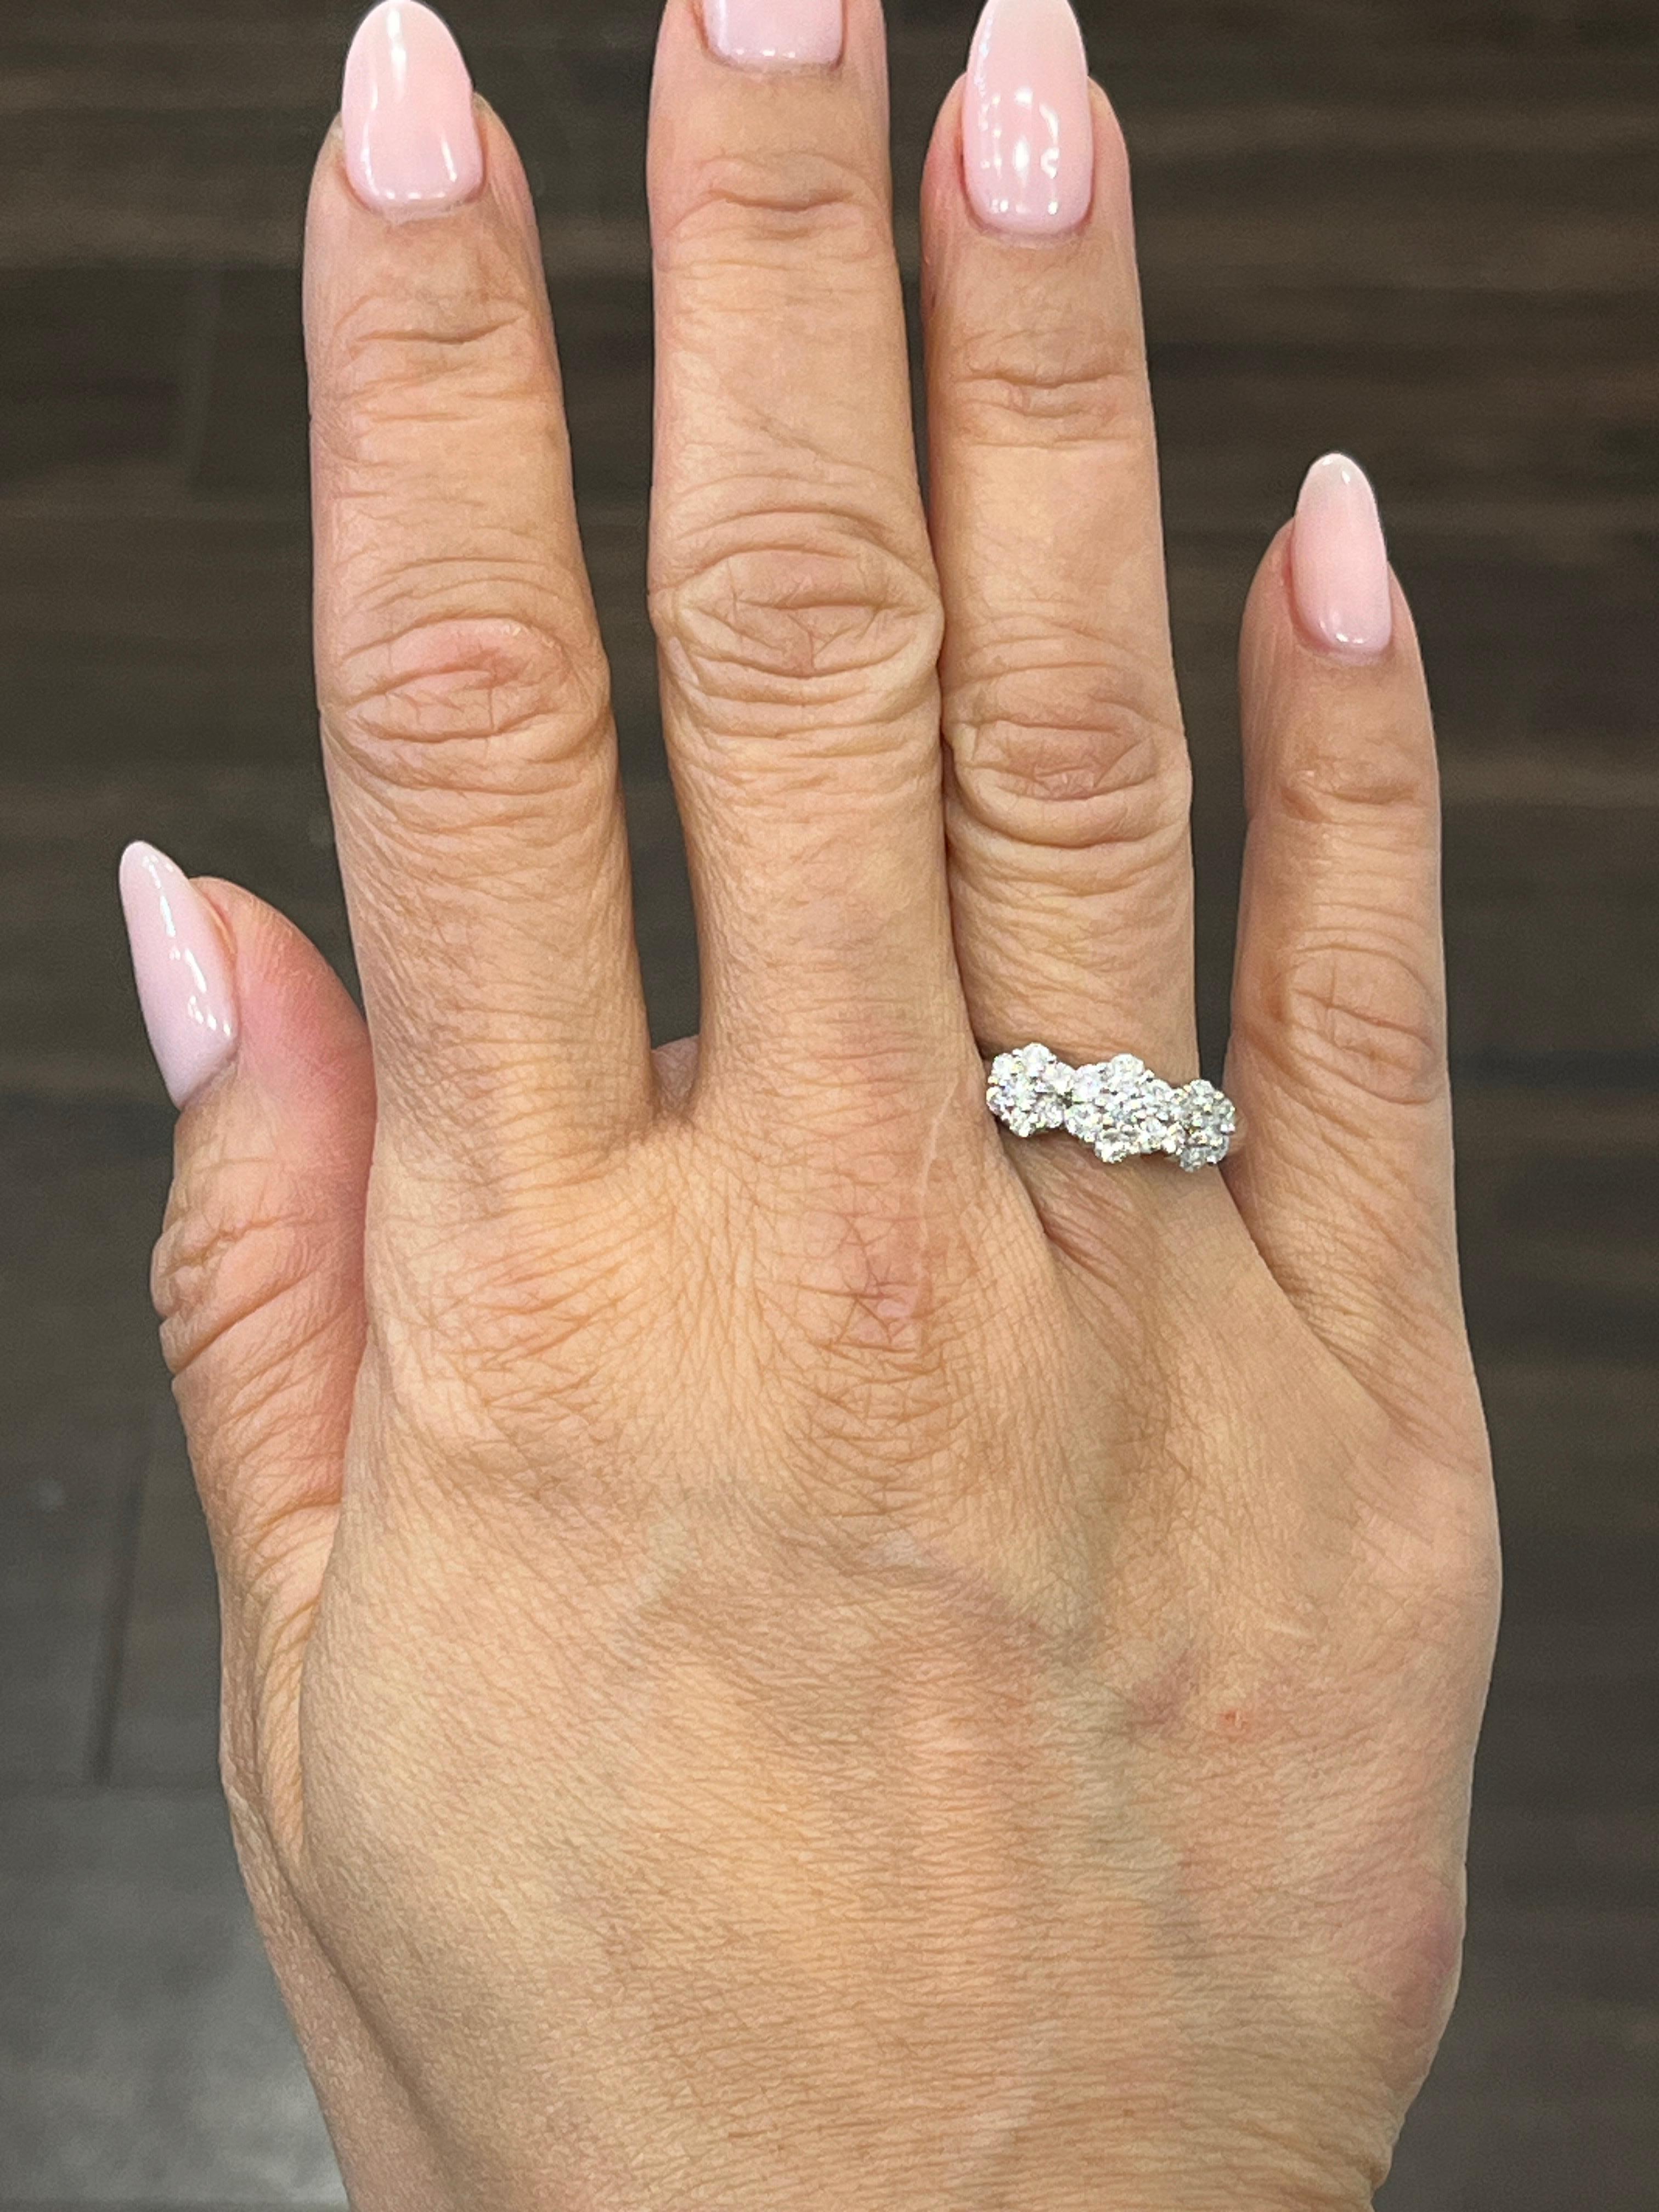 This stunning 18k white gold ring boasts 21 sparkling round diamonds with a total carat weight of 0.97. The diamonds have a clarity grade of VS2/SI1 and a color grade of F/G, making them a brilliant white. The ring is size 6.5 and can be adjusted as